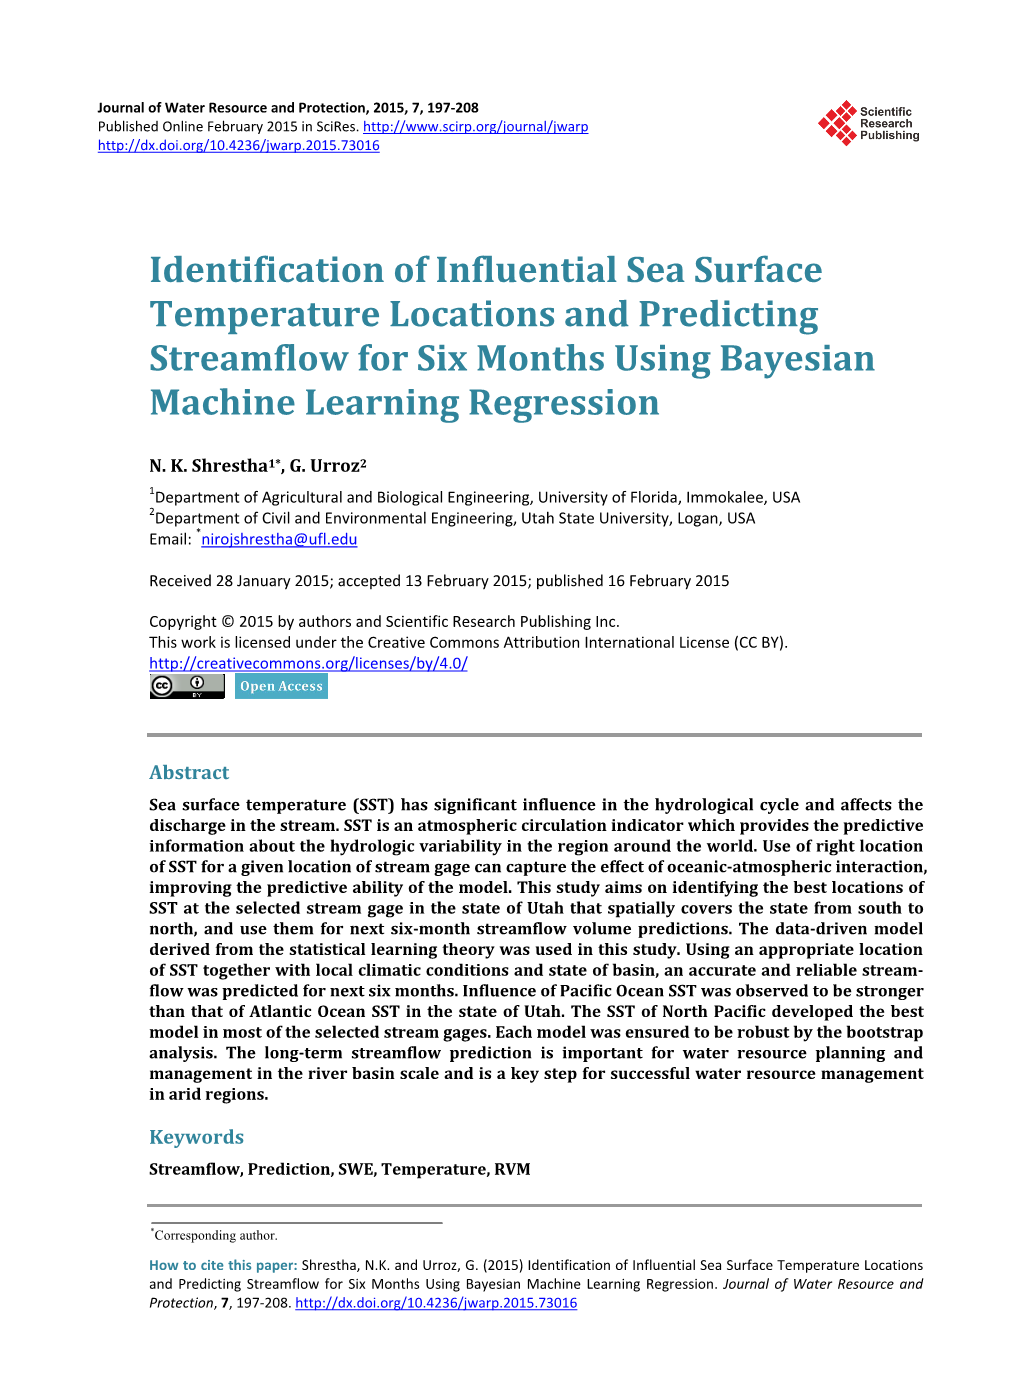 Identification of Influential Sea Surface Temperature Locations and Predicting Streamflow for Six Months Using Bayesian Machine Learning Regression